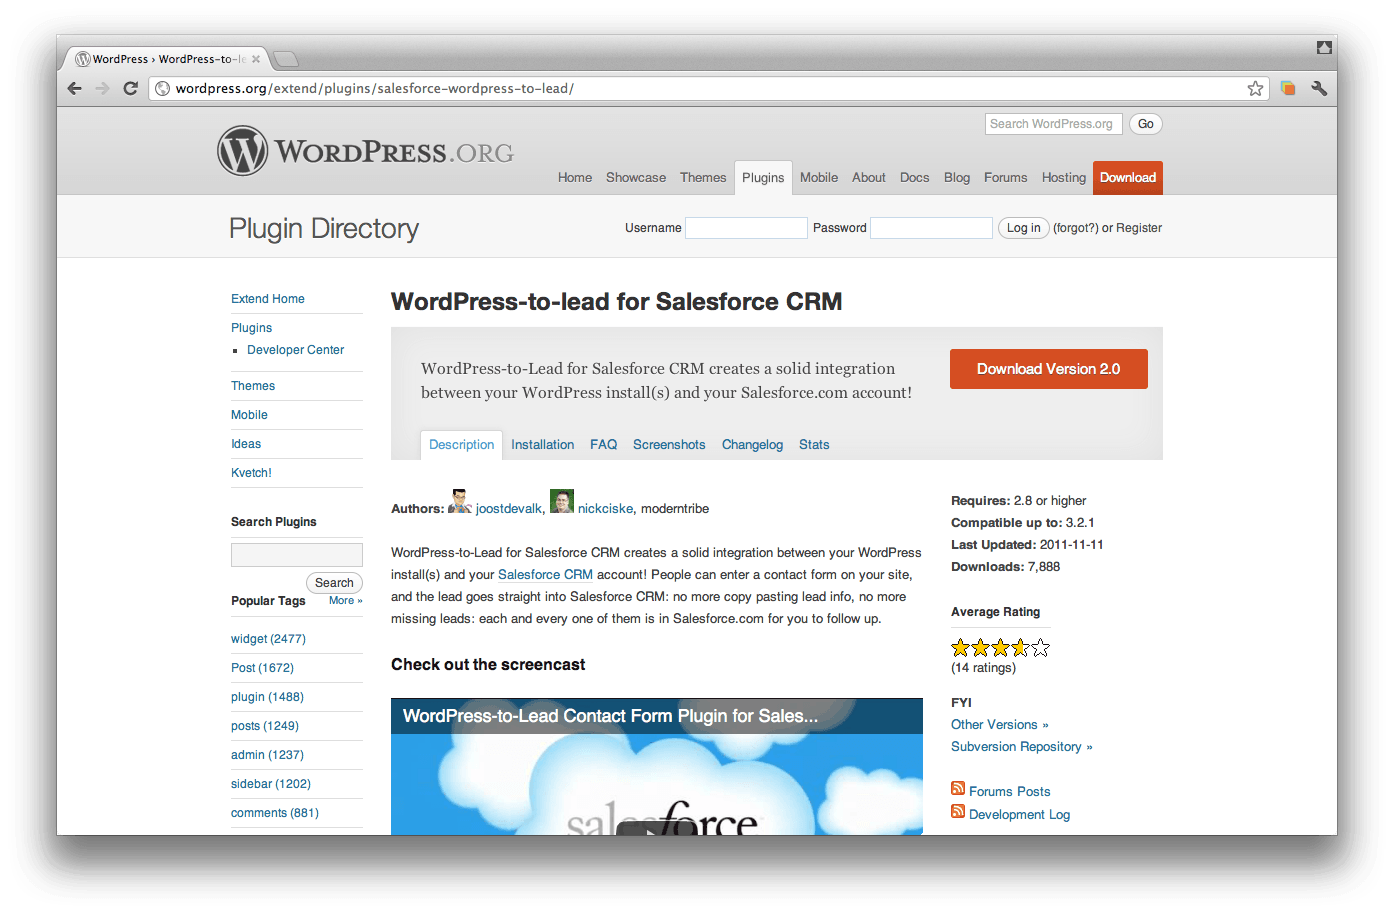 WordPress-to-lead for Salesforce CRM